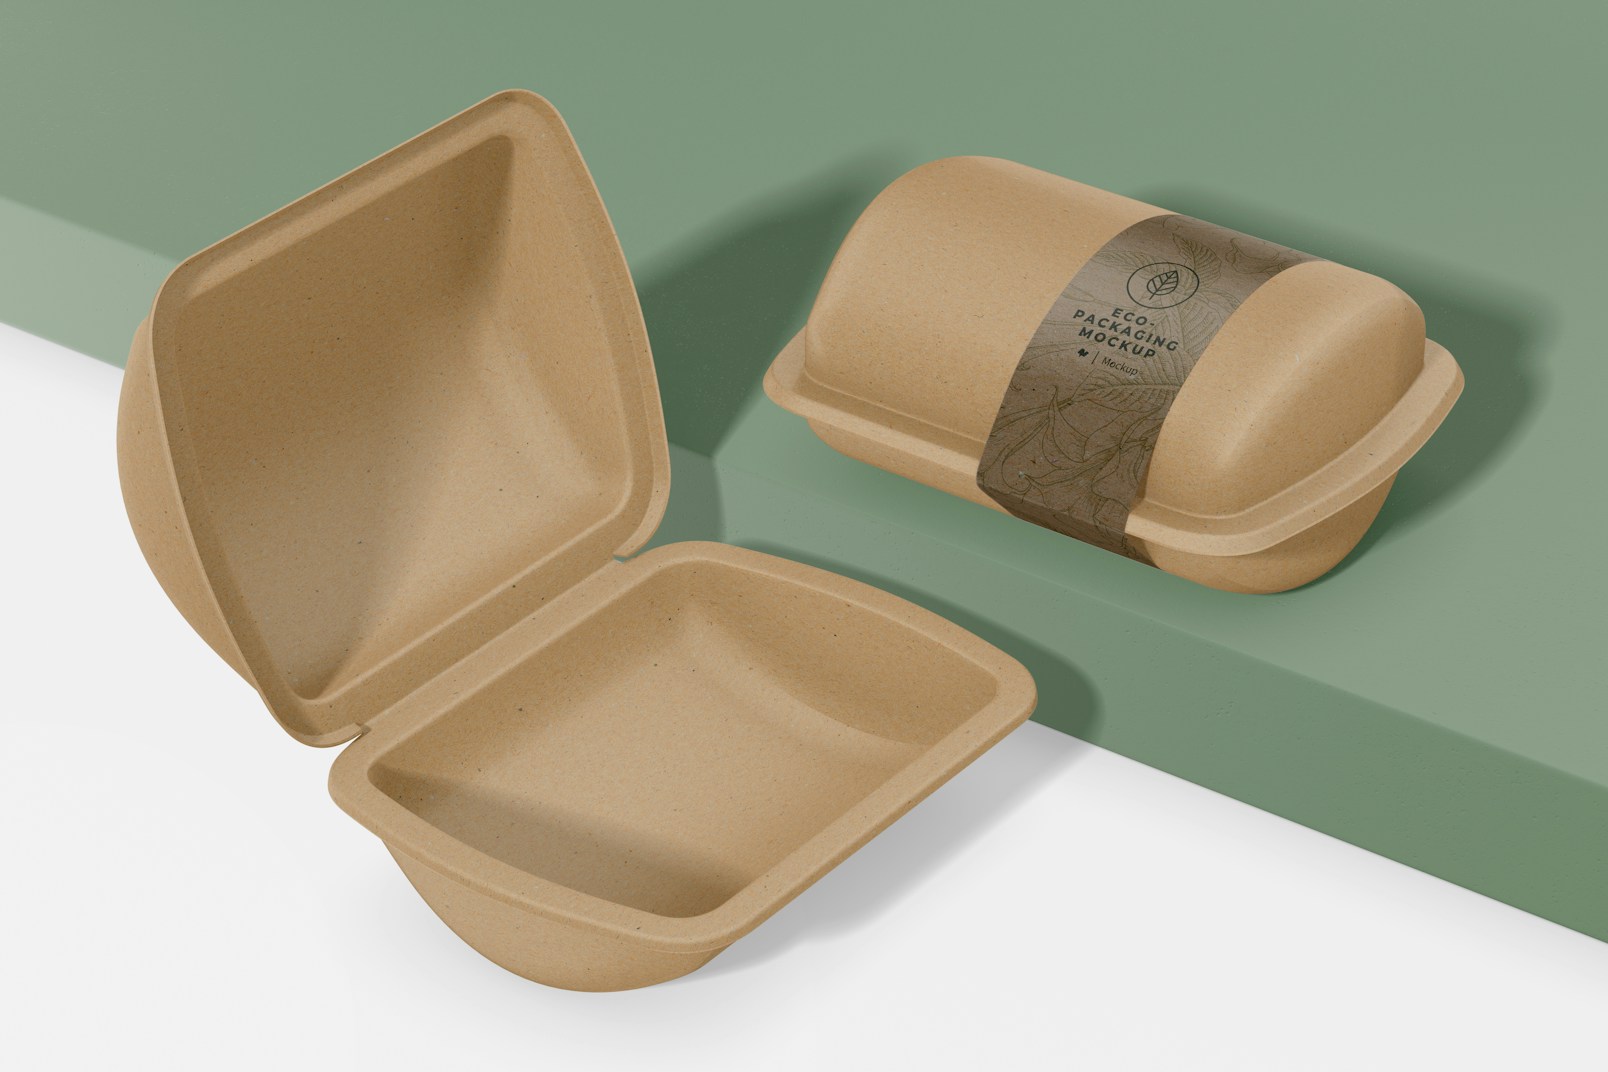 Small Biodegradable Food Packaging Mockup, Opened and Closed